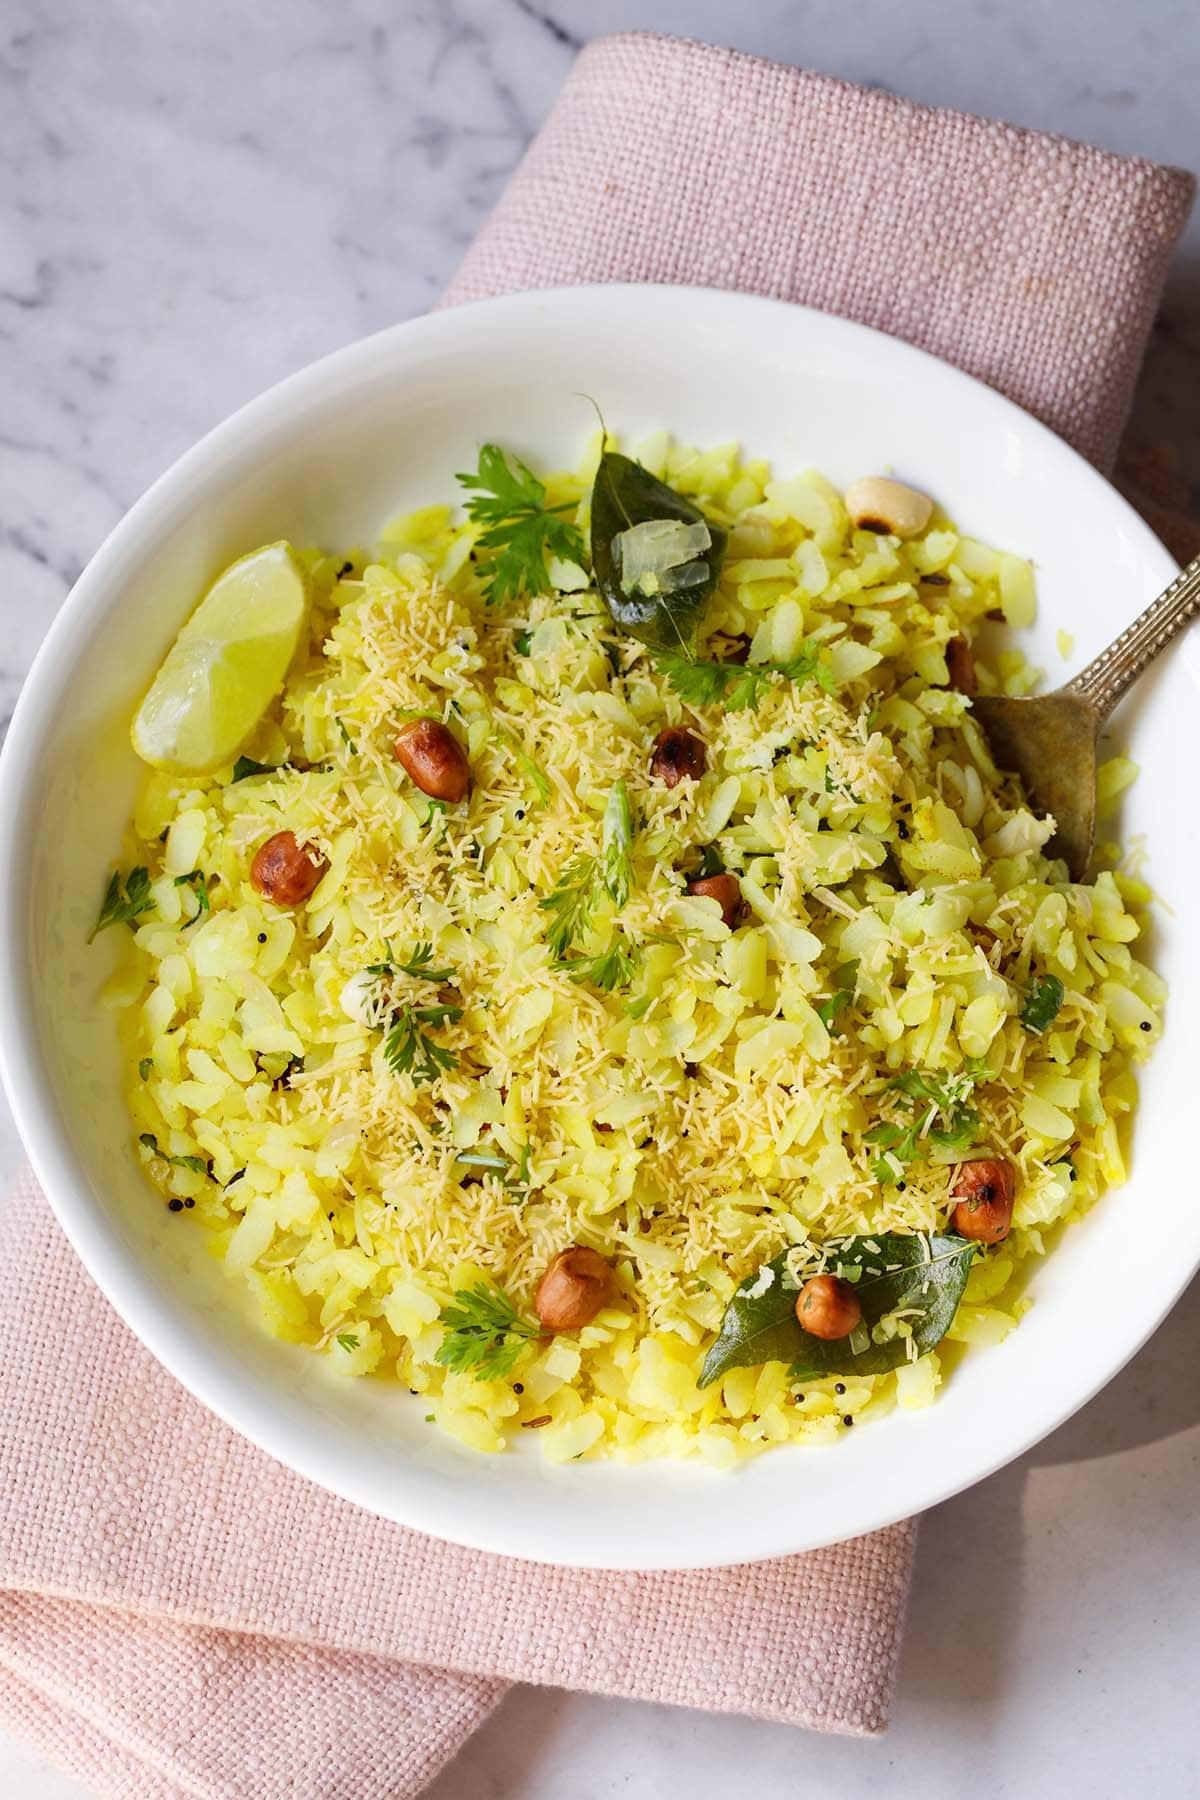 kanda poha in a white bowl with a lemon wedge and spoon.